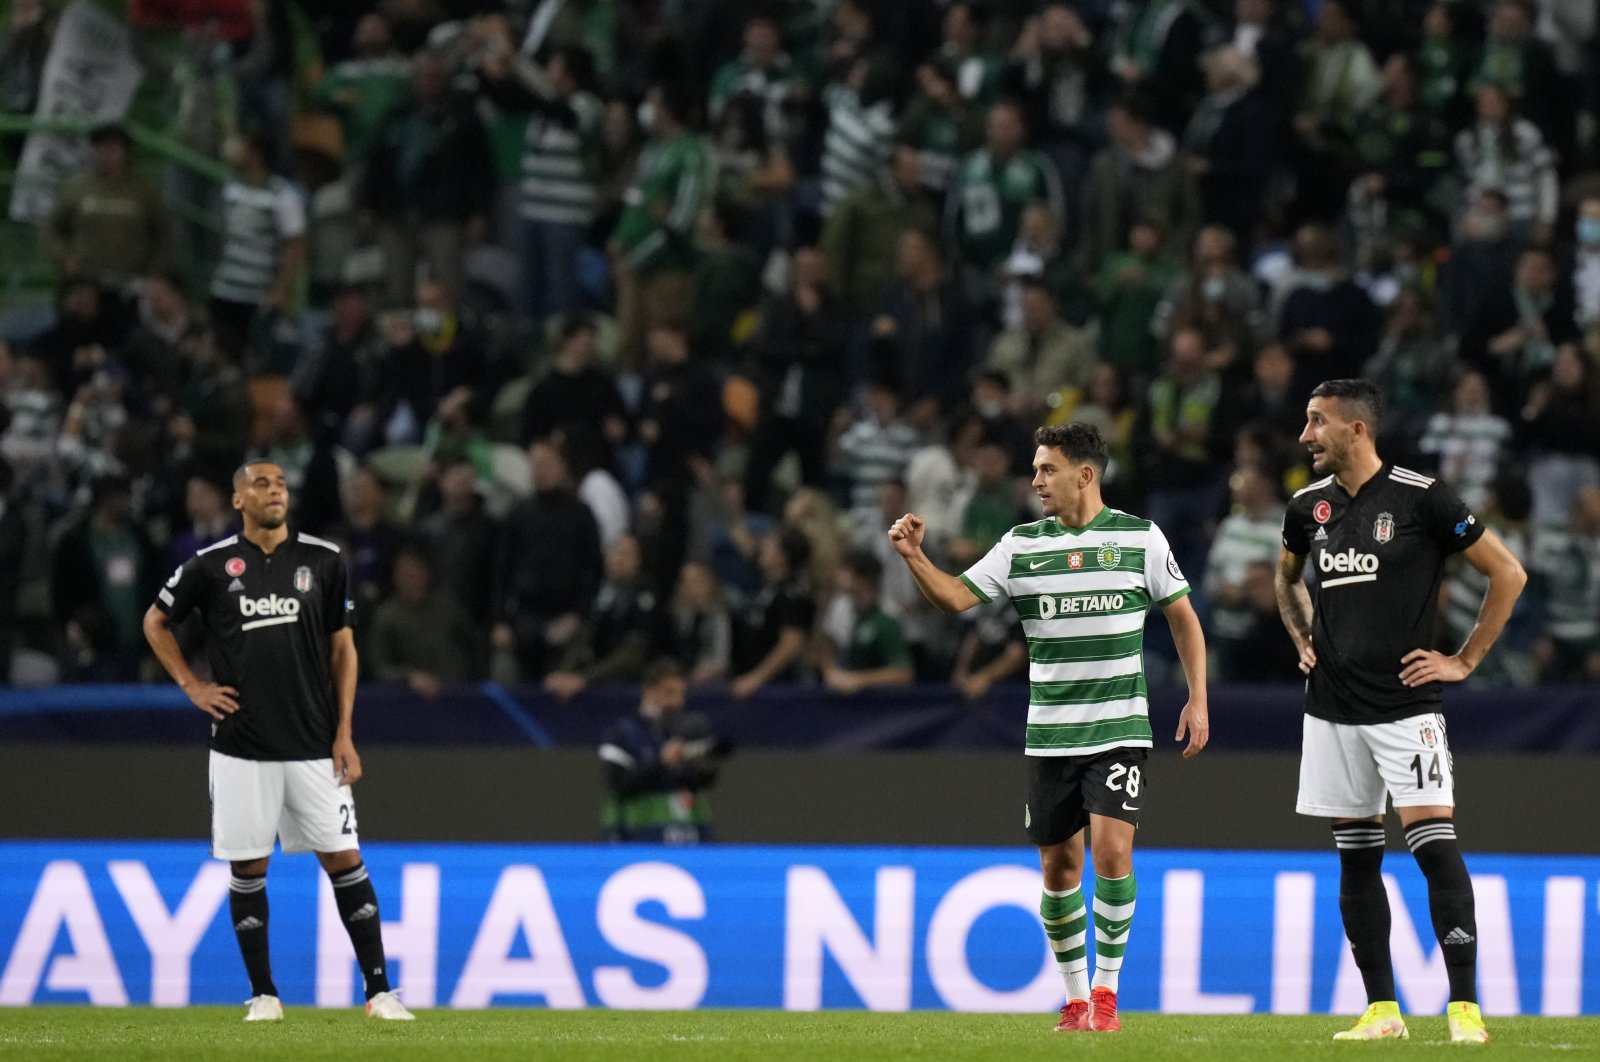 Sporting's Pedro Goncalves (C) celebrates after scoring in a Champions League match against Beşiktaş at the Alvalade stadium in Lisbon, Portugal, Nov. 3, 2021. (AP Photo)